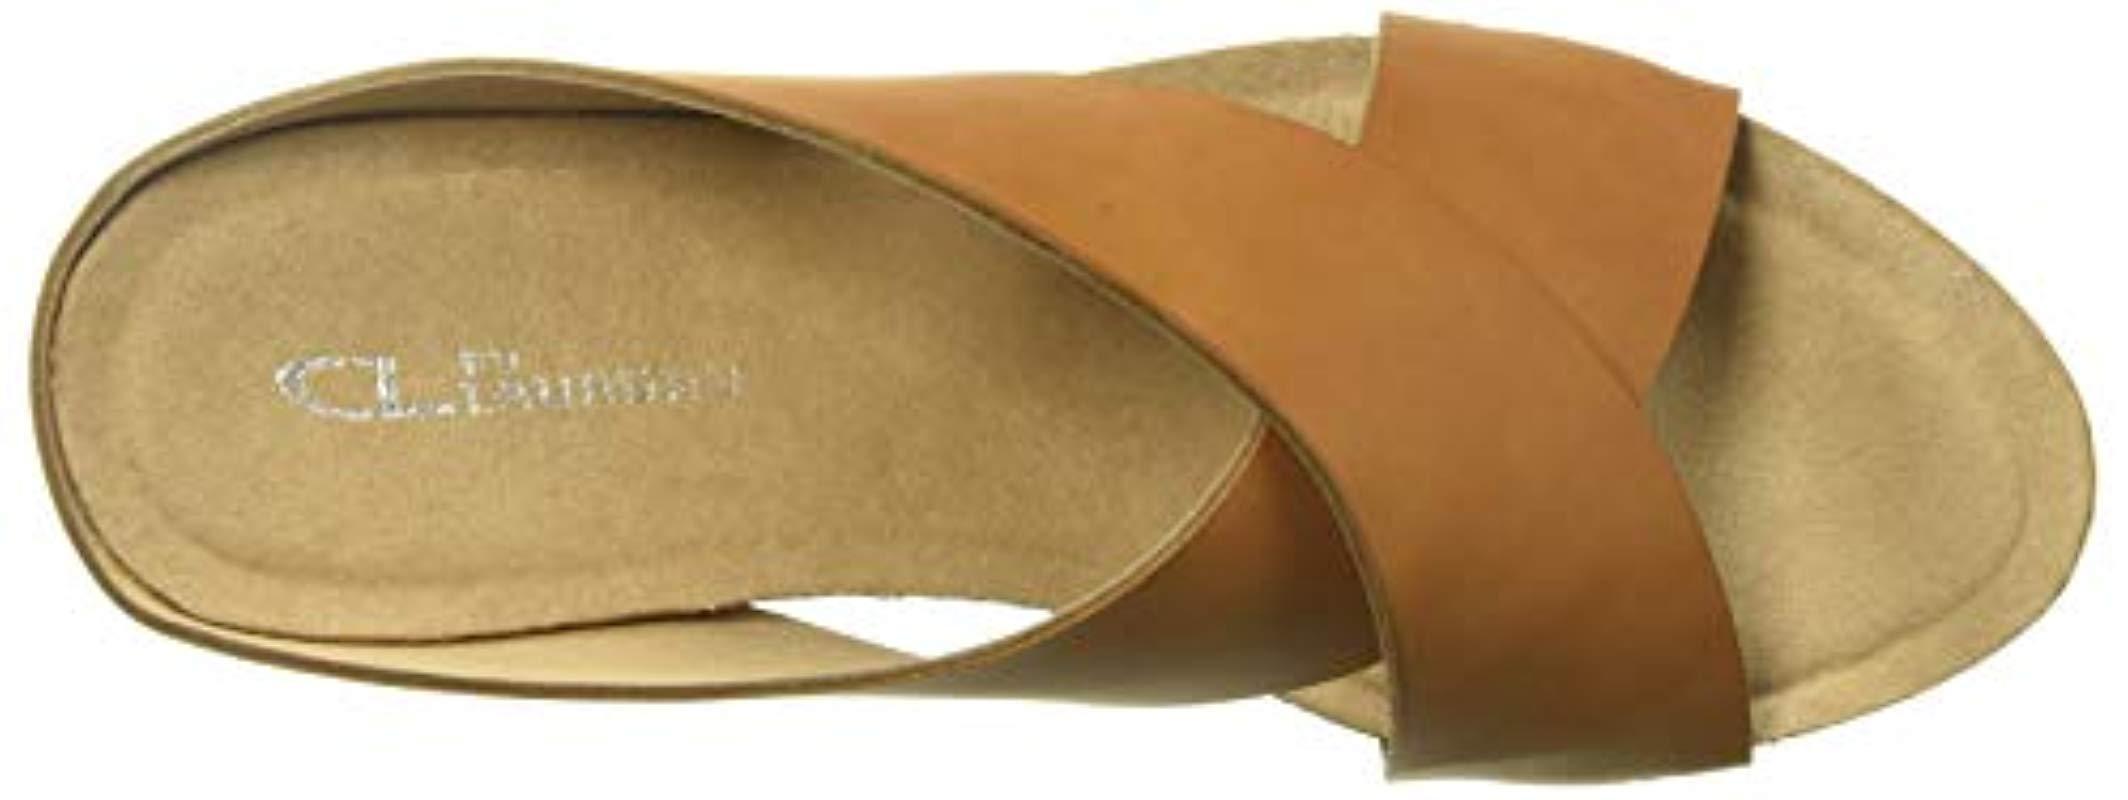 CL by Chinese Laundry Womens Abloom Wedge Sandal